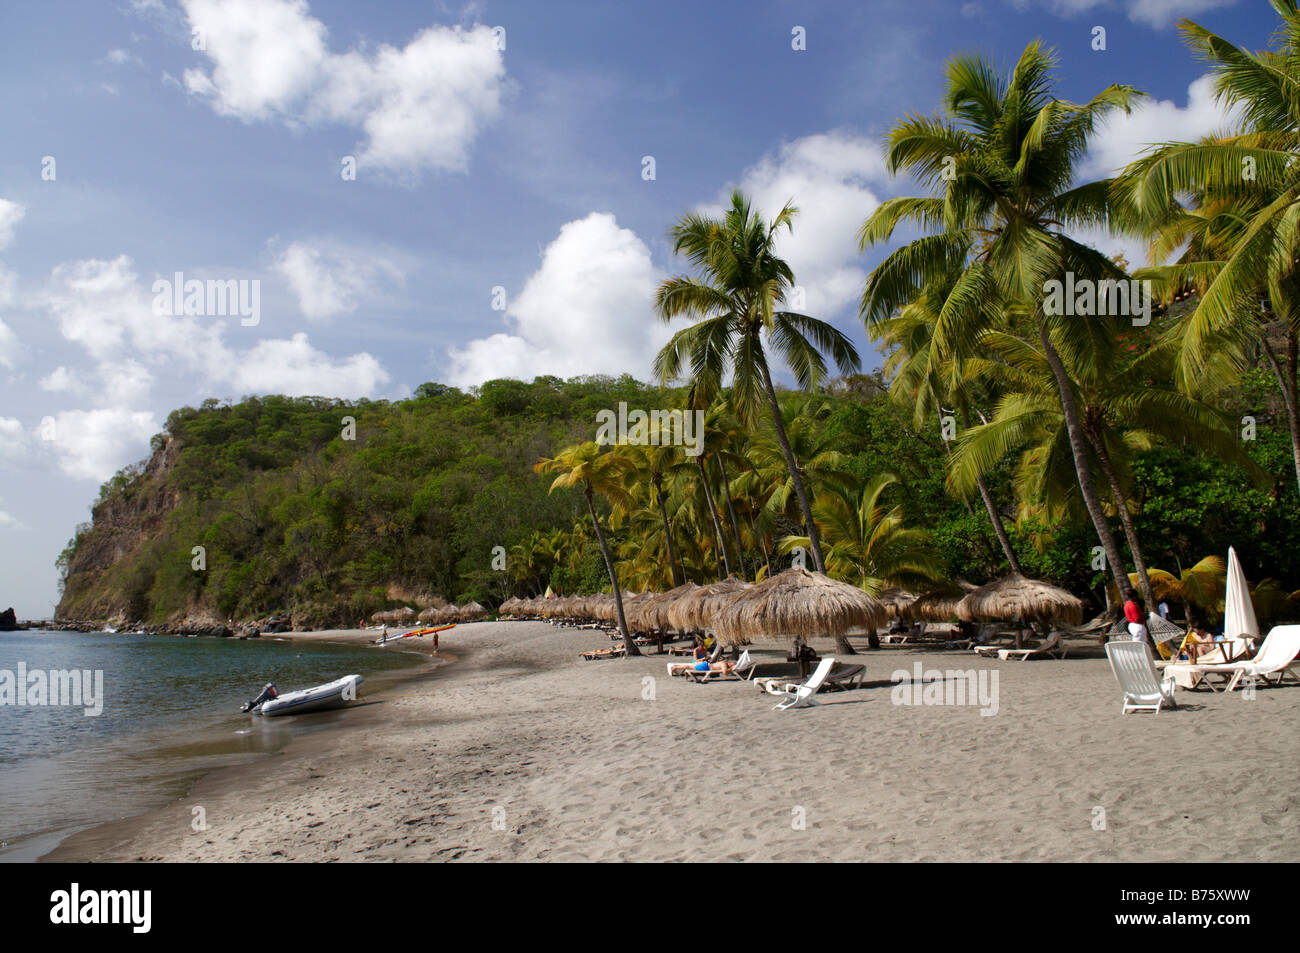 Tourists relax on a stretch of beach at Anse Chastenet, St Lucia, Caribbean. Stock Photo